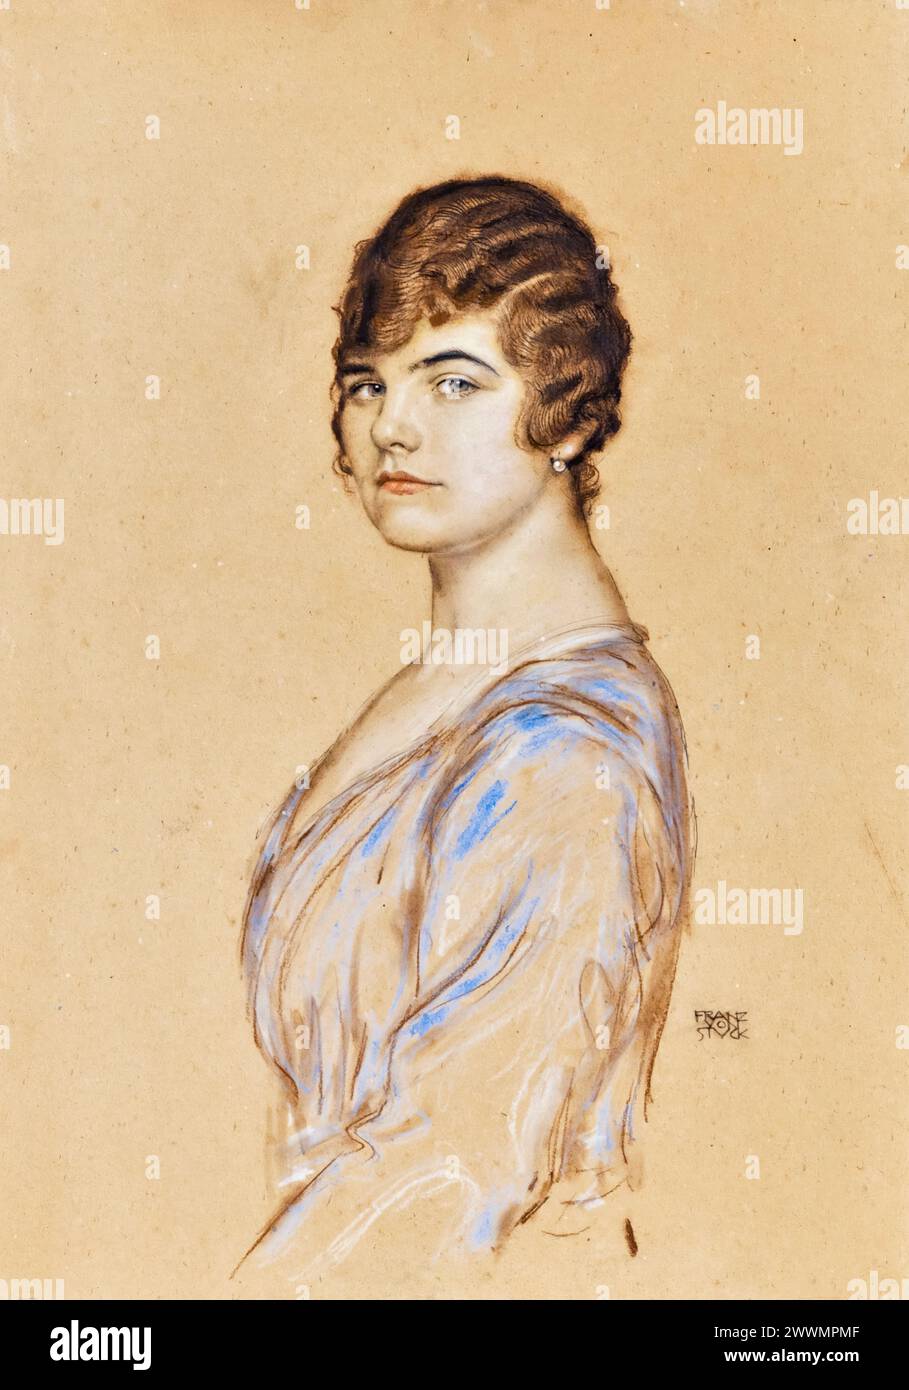 Franz von Stuck, Girl in a Blue Dress, portrait drawing in pastel, before 1928 Stock Photo